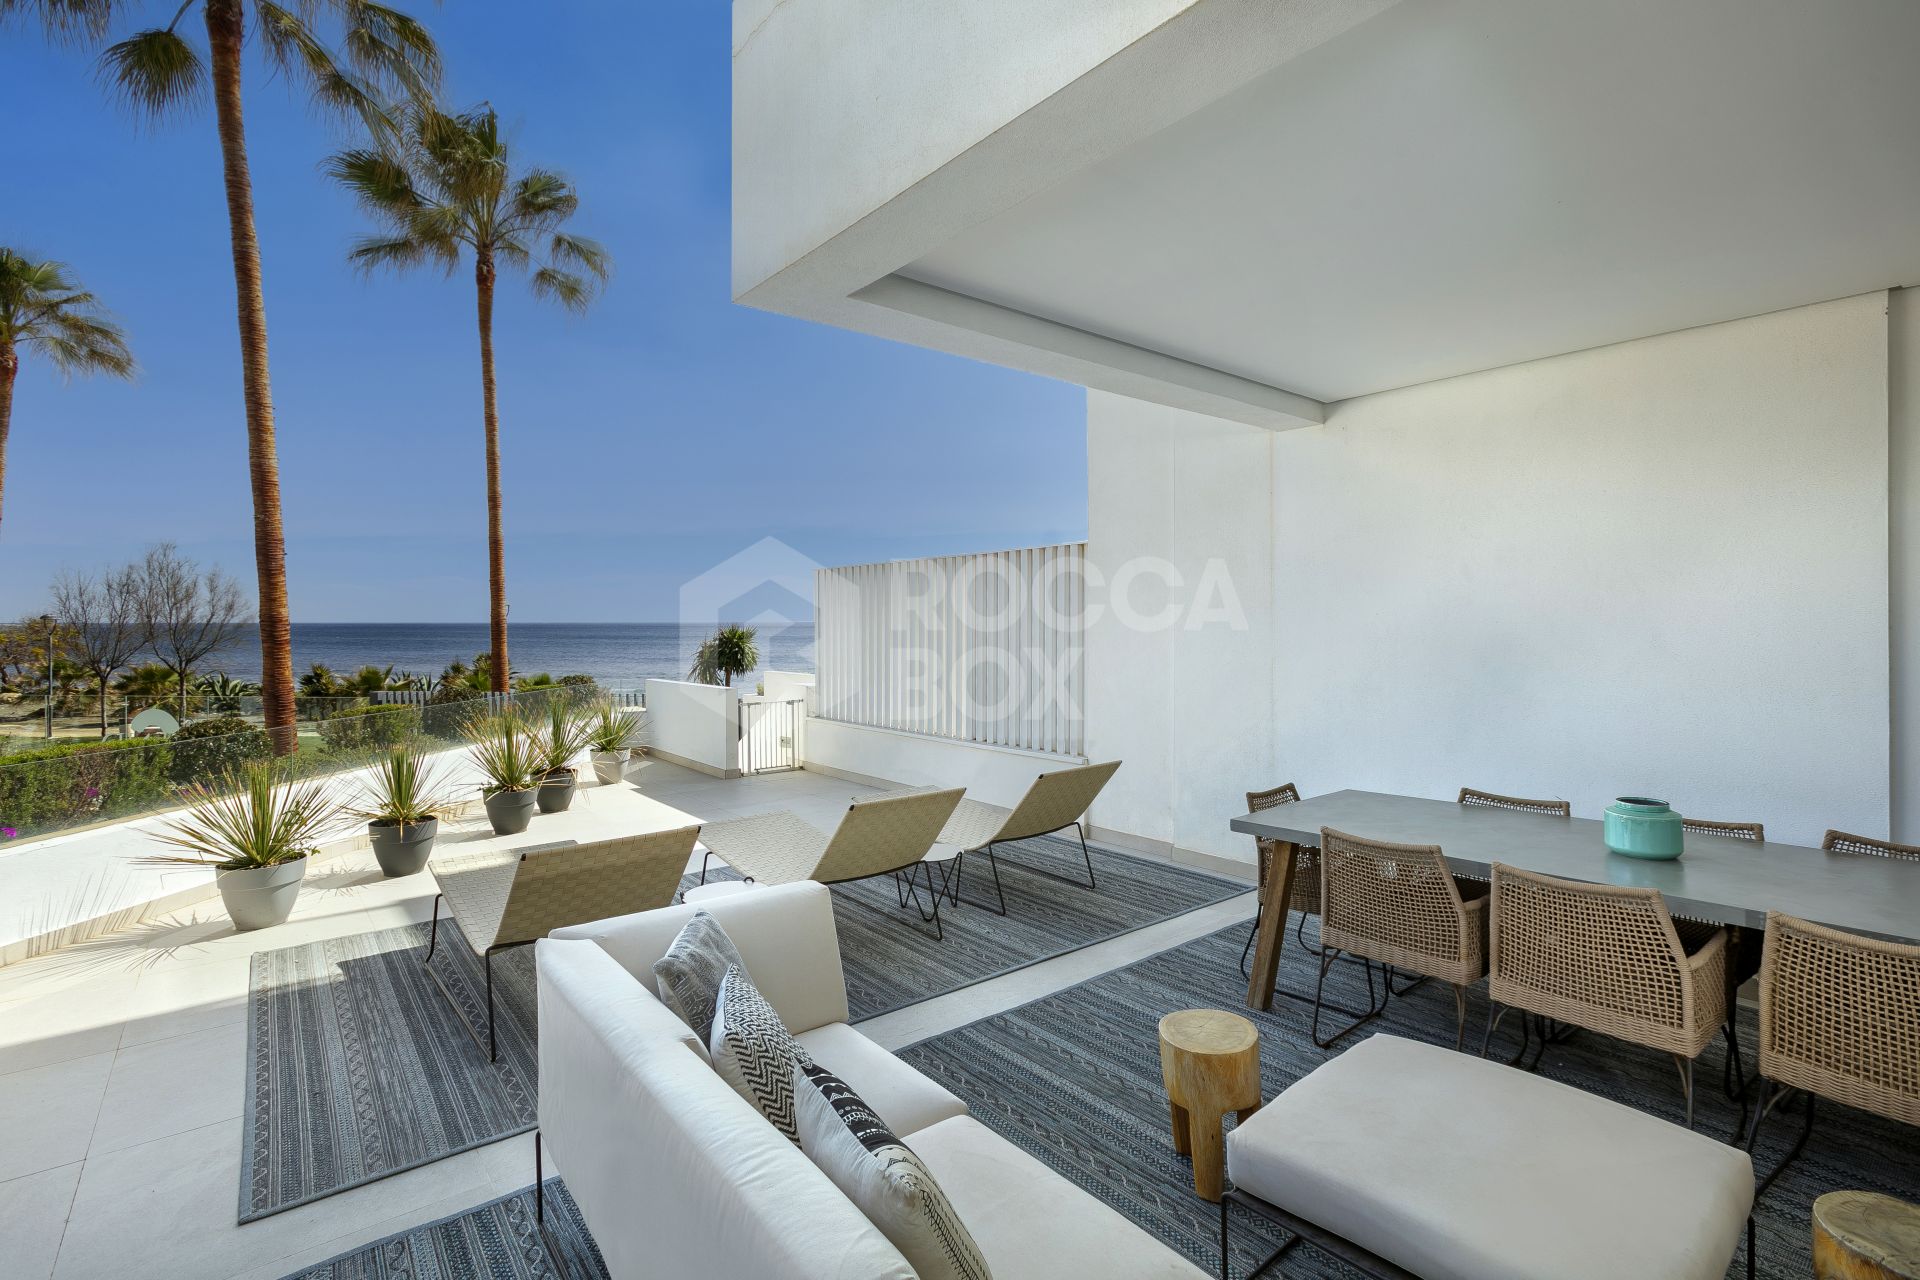 This is an extraordinary townhouse with open sea views and exclusive furnishings included.